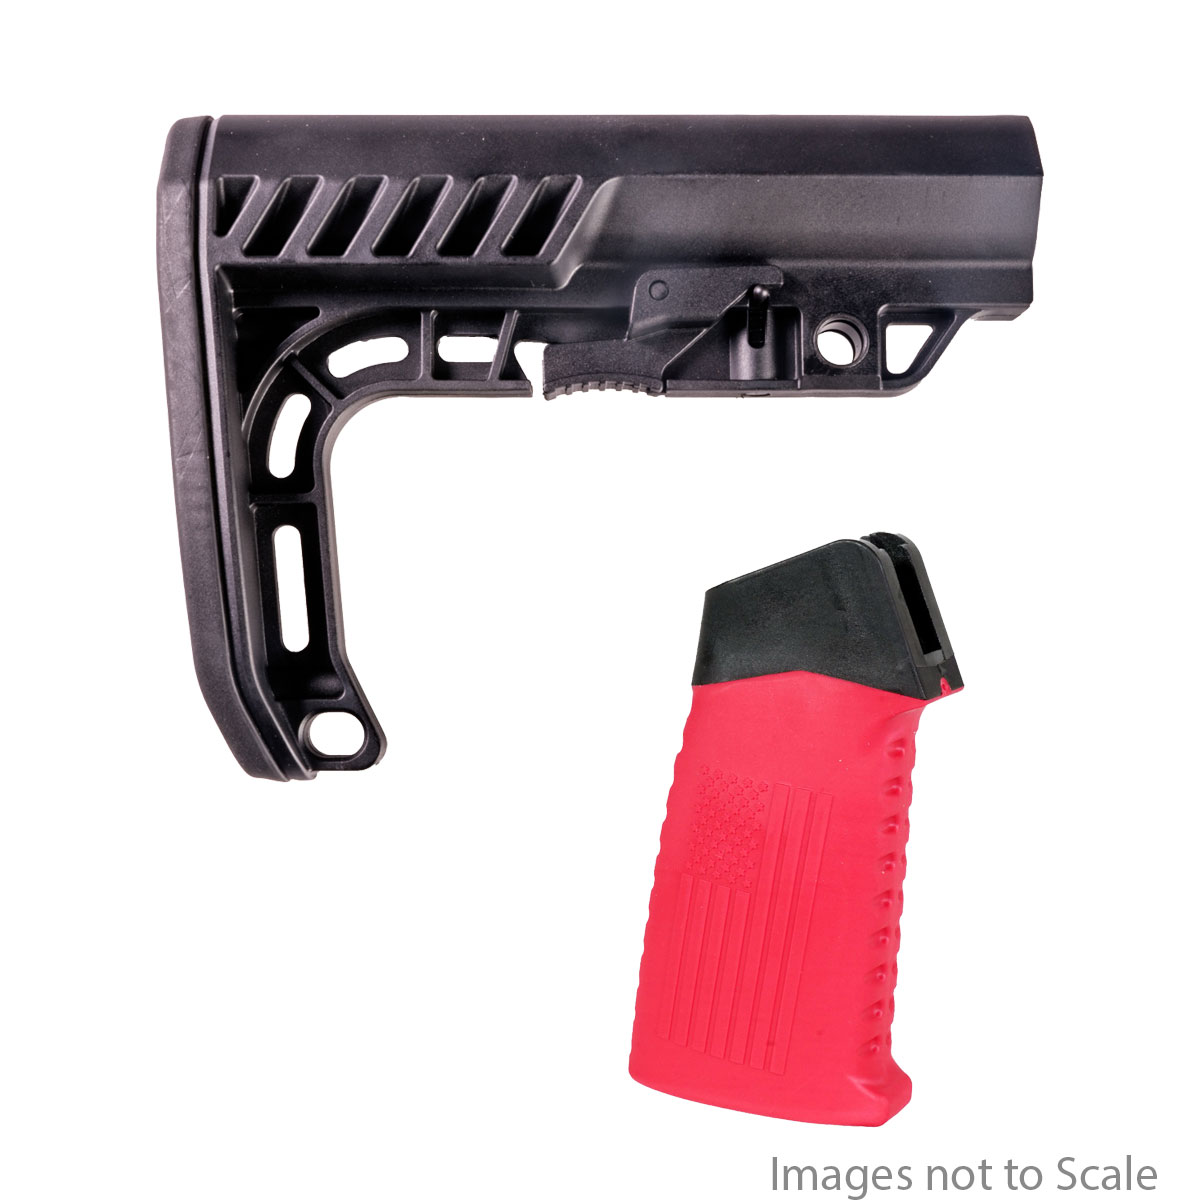 Furniture Upgrade Kit: Team Accessories Corp AR15 Grip Window Grip Straight Top Flag/Ribbed Red  + Gauntlet Arms Minimalist AR-15 Stock